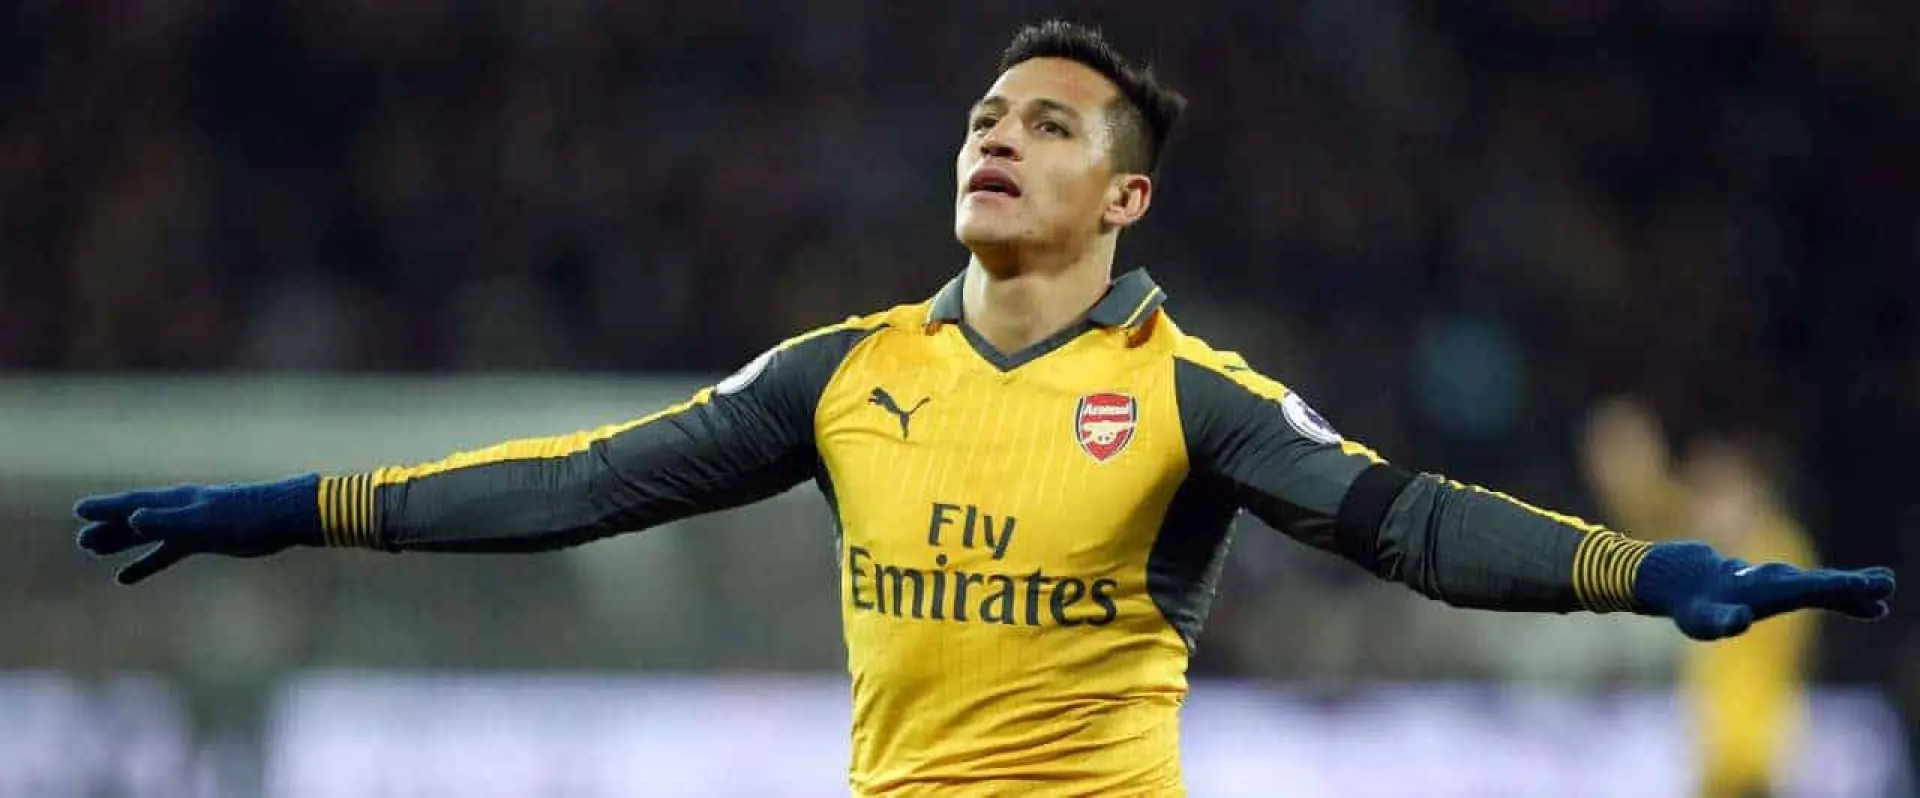 Sanchez to score two or more